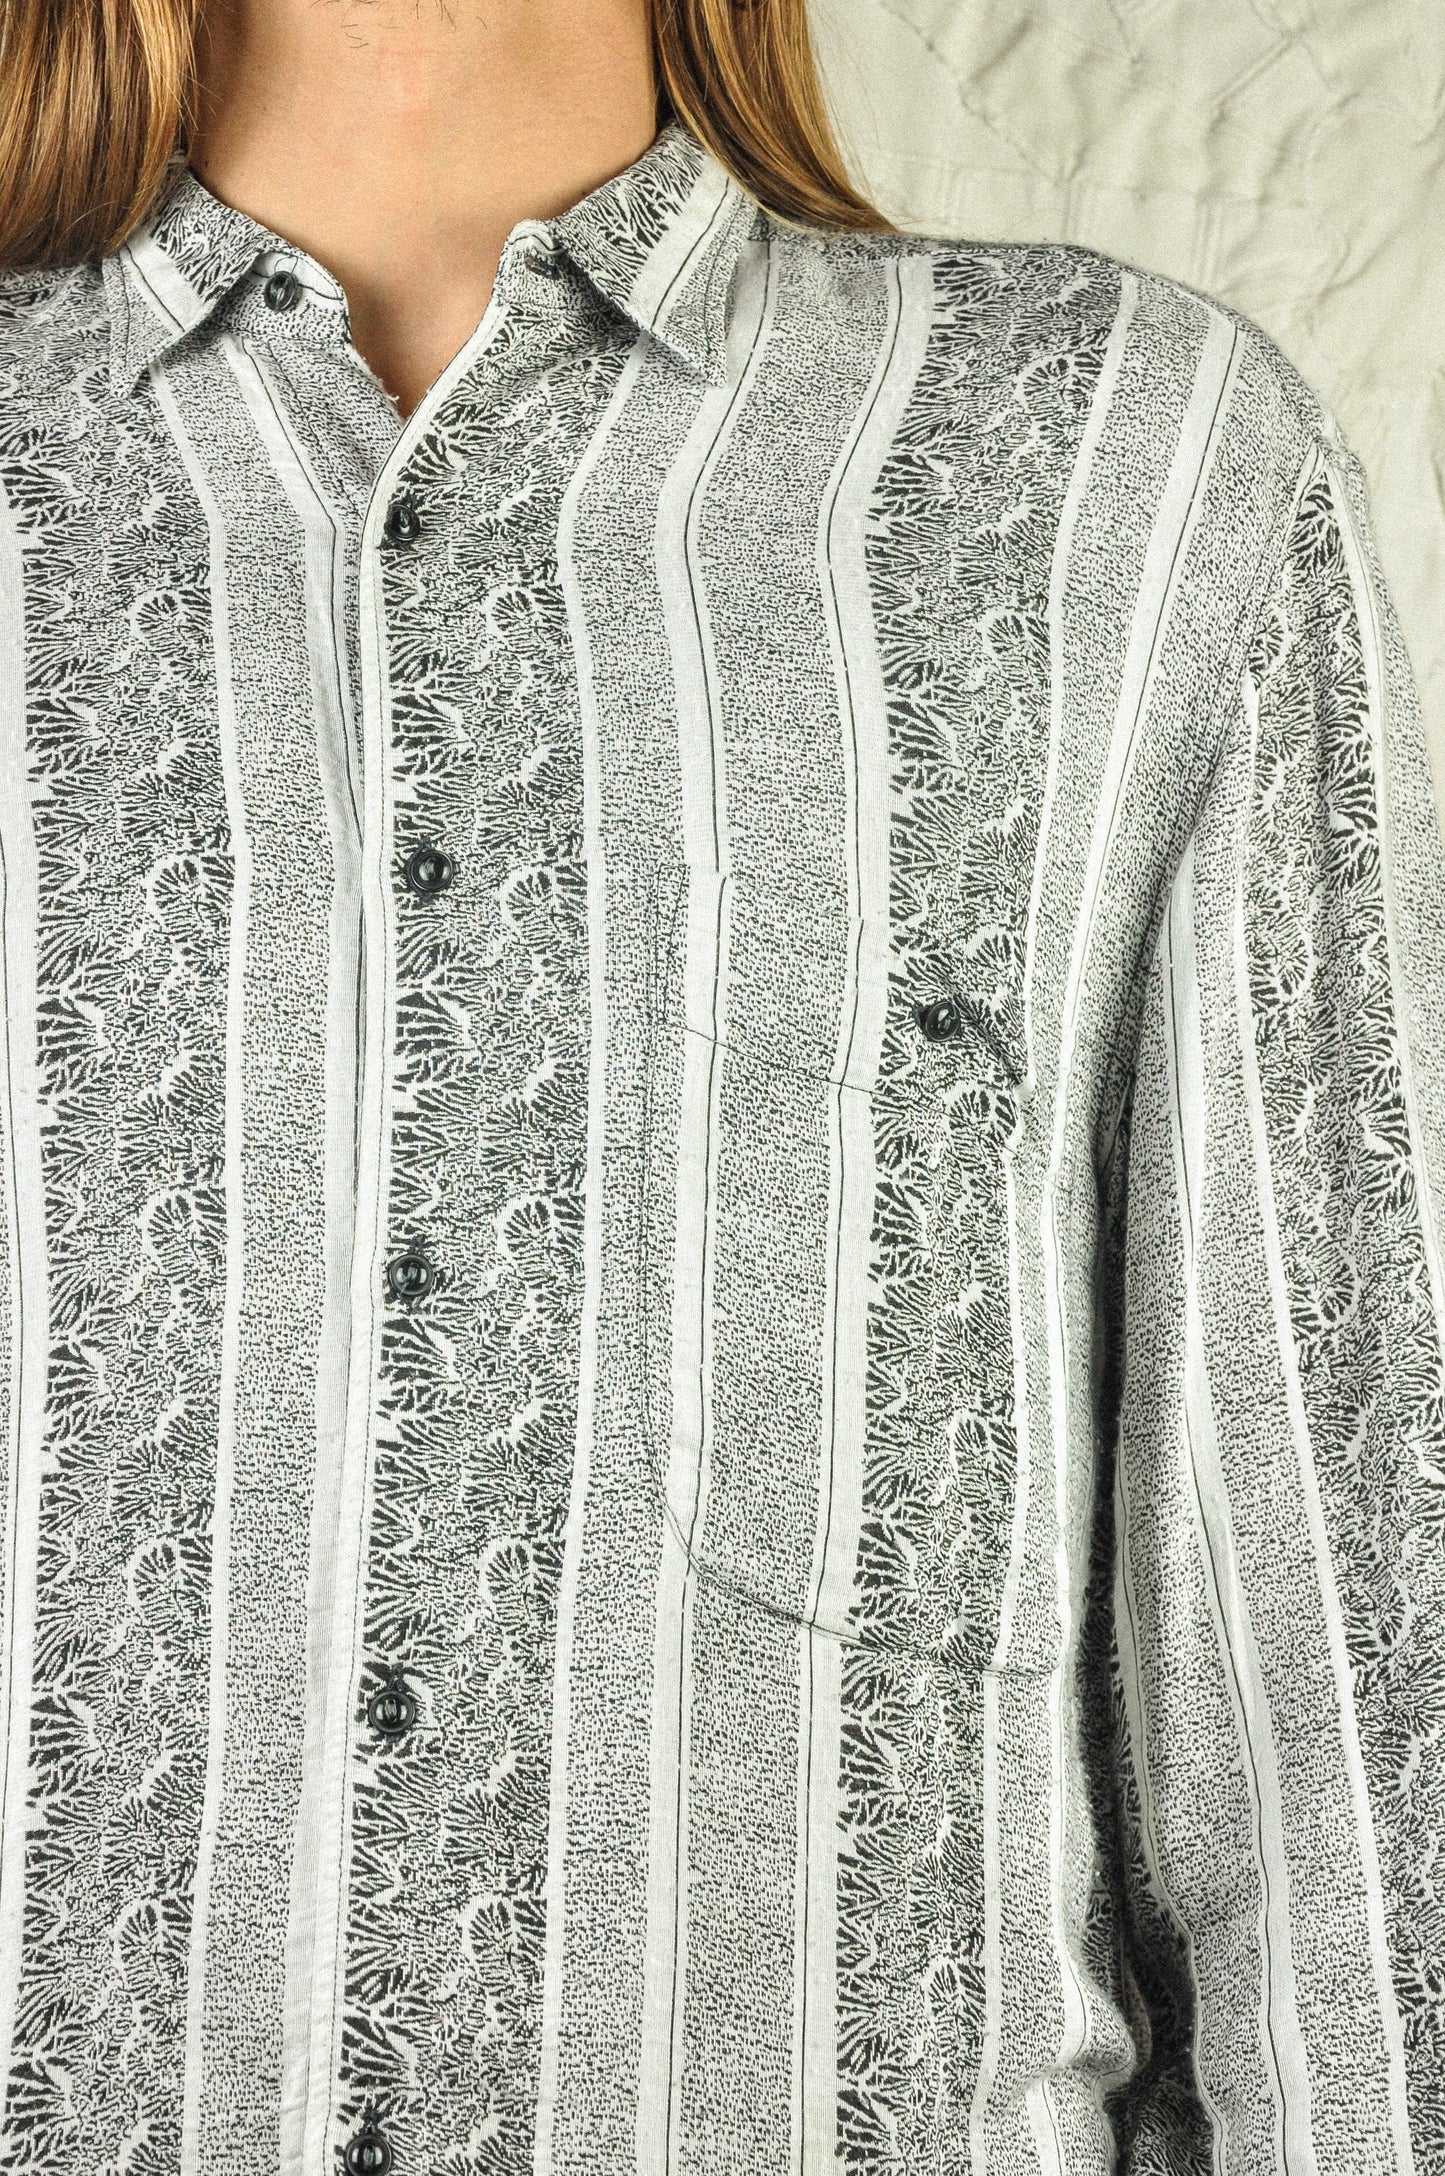 VINTAGE 90's COTTON ABSTRACT STRIPES LONG SLEEVE SHIRT